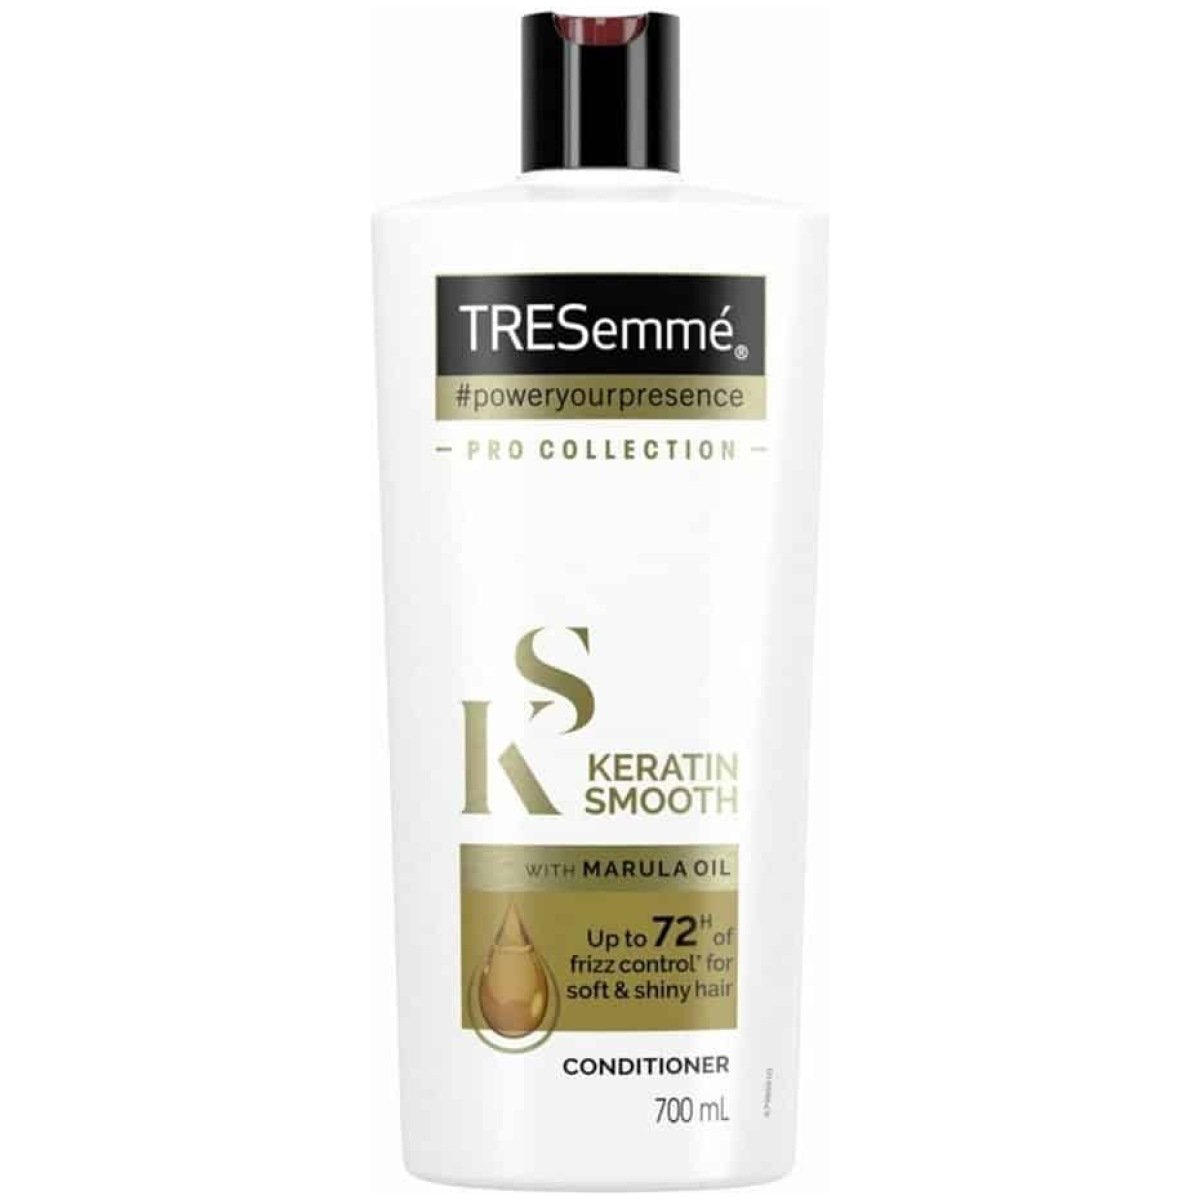 Tresemme Pro Collection Keratin Smooth Conditioner 700ml